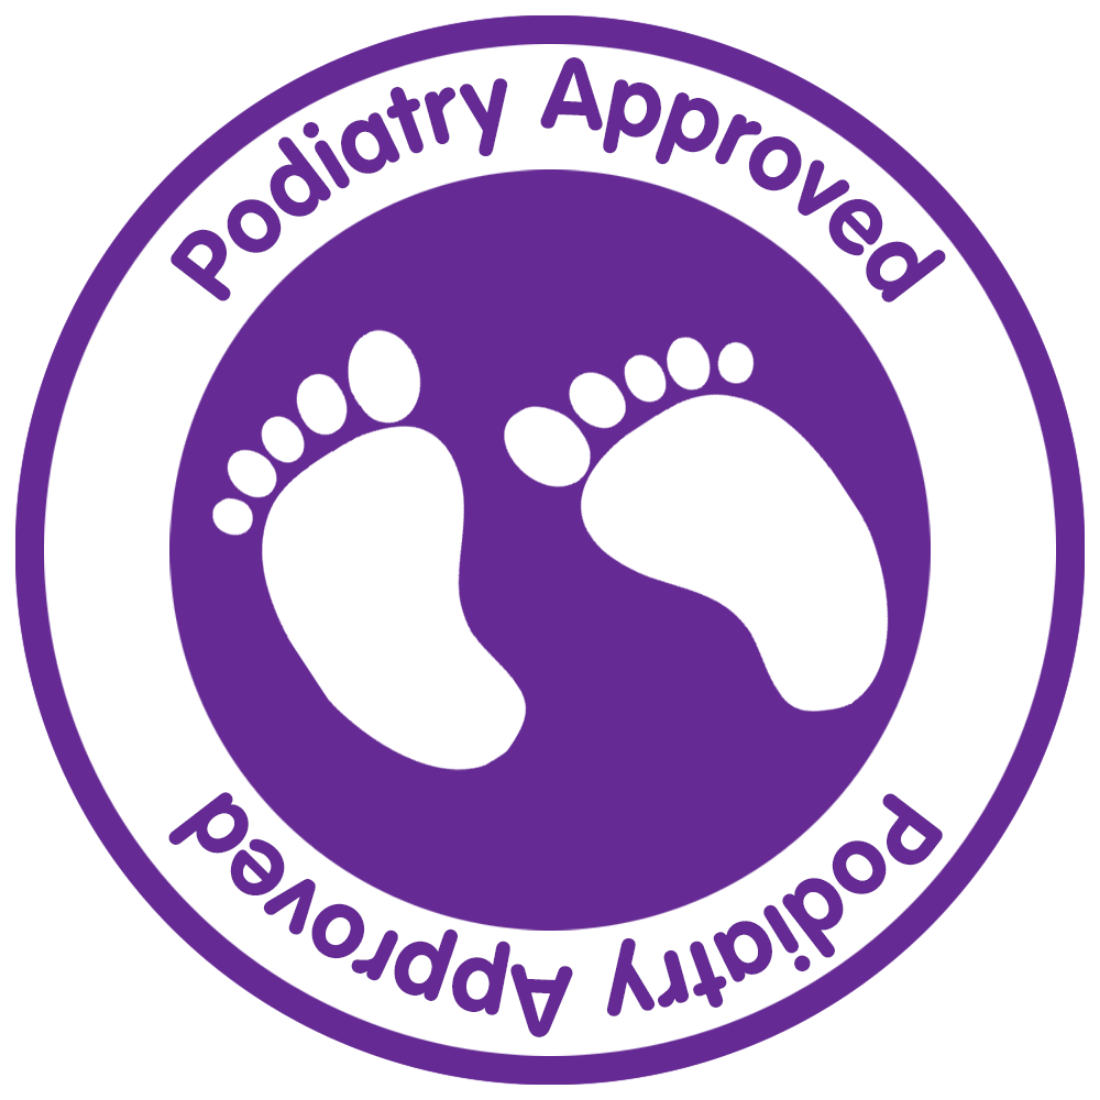 Podiatry Approved baby shoes from Dotty Fish